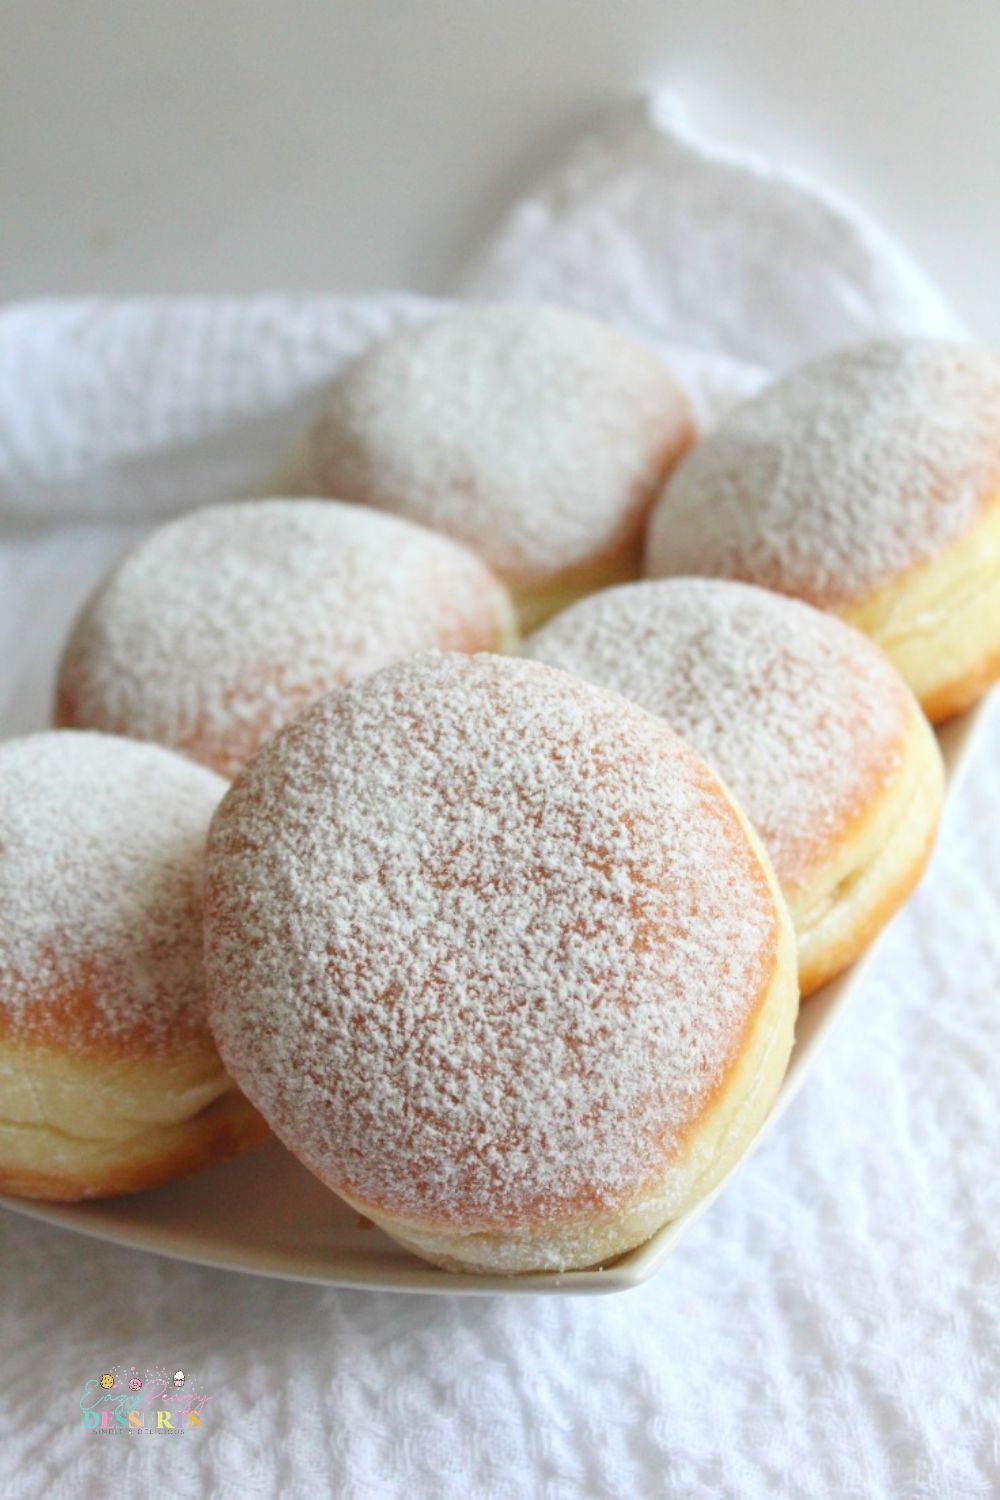 Close p image of jelly donuts filled with strawberry jam